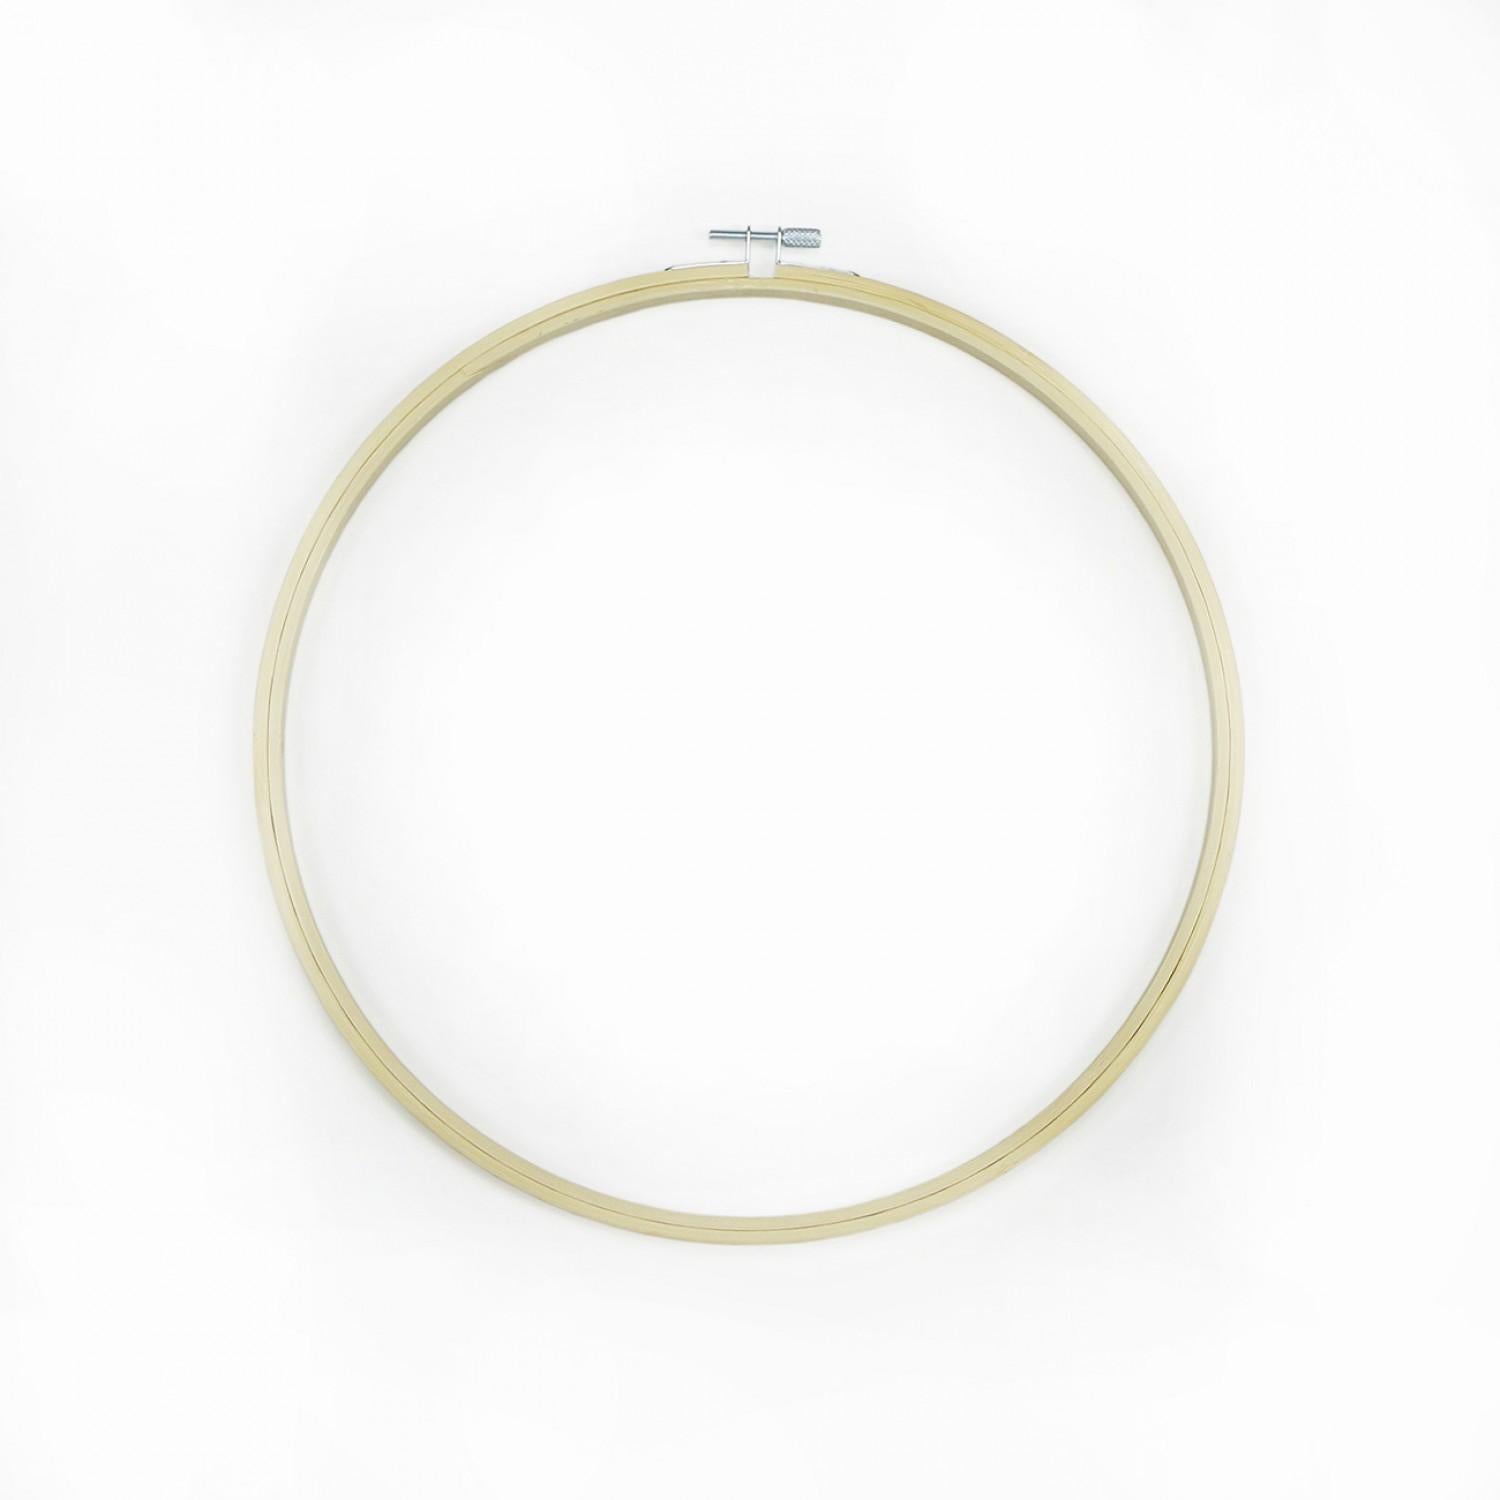 Bamboo Embroidery hoop 12in